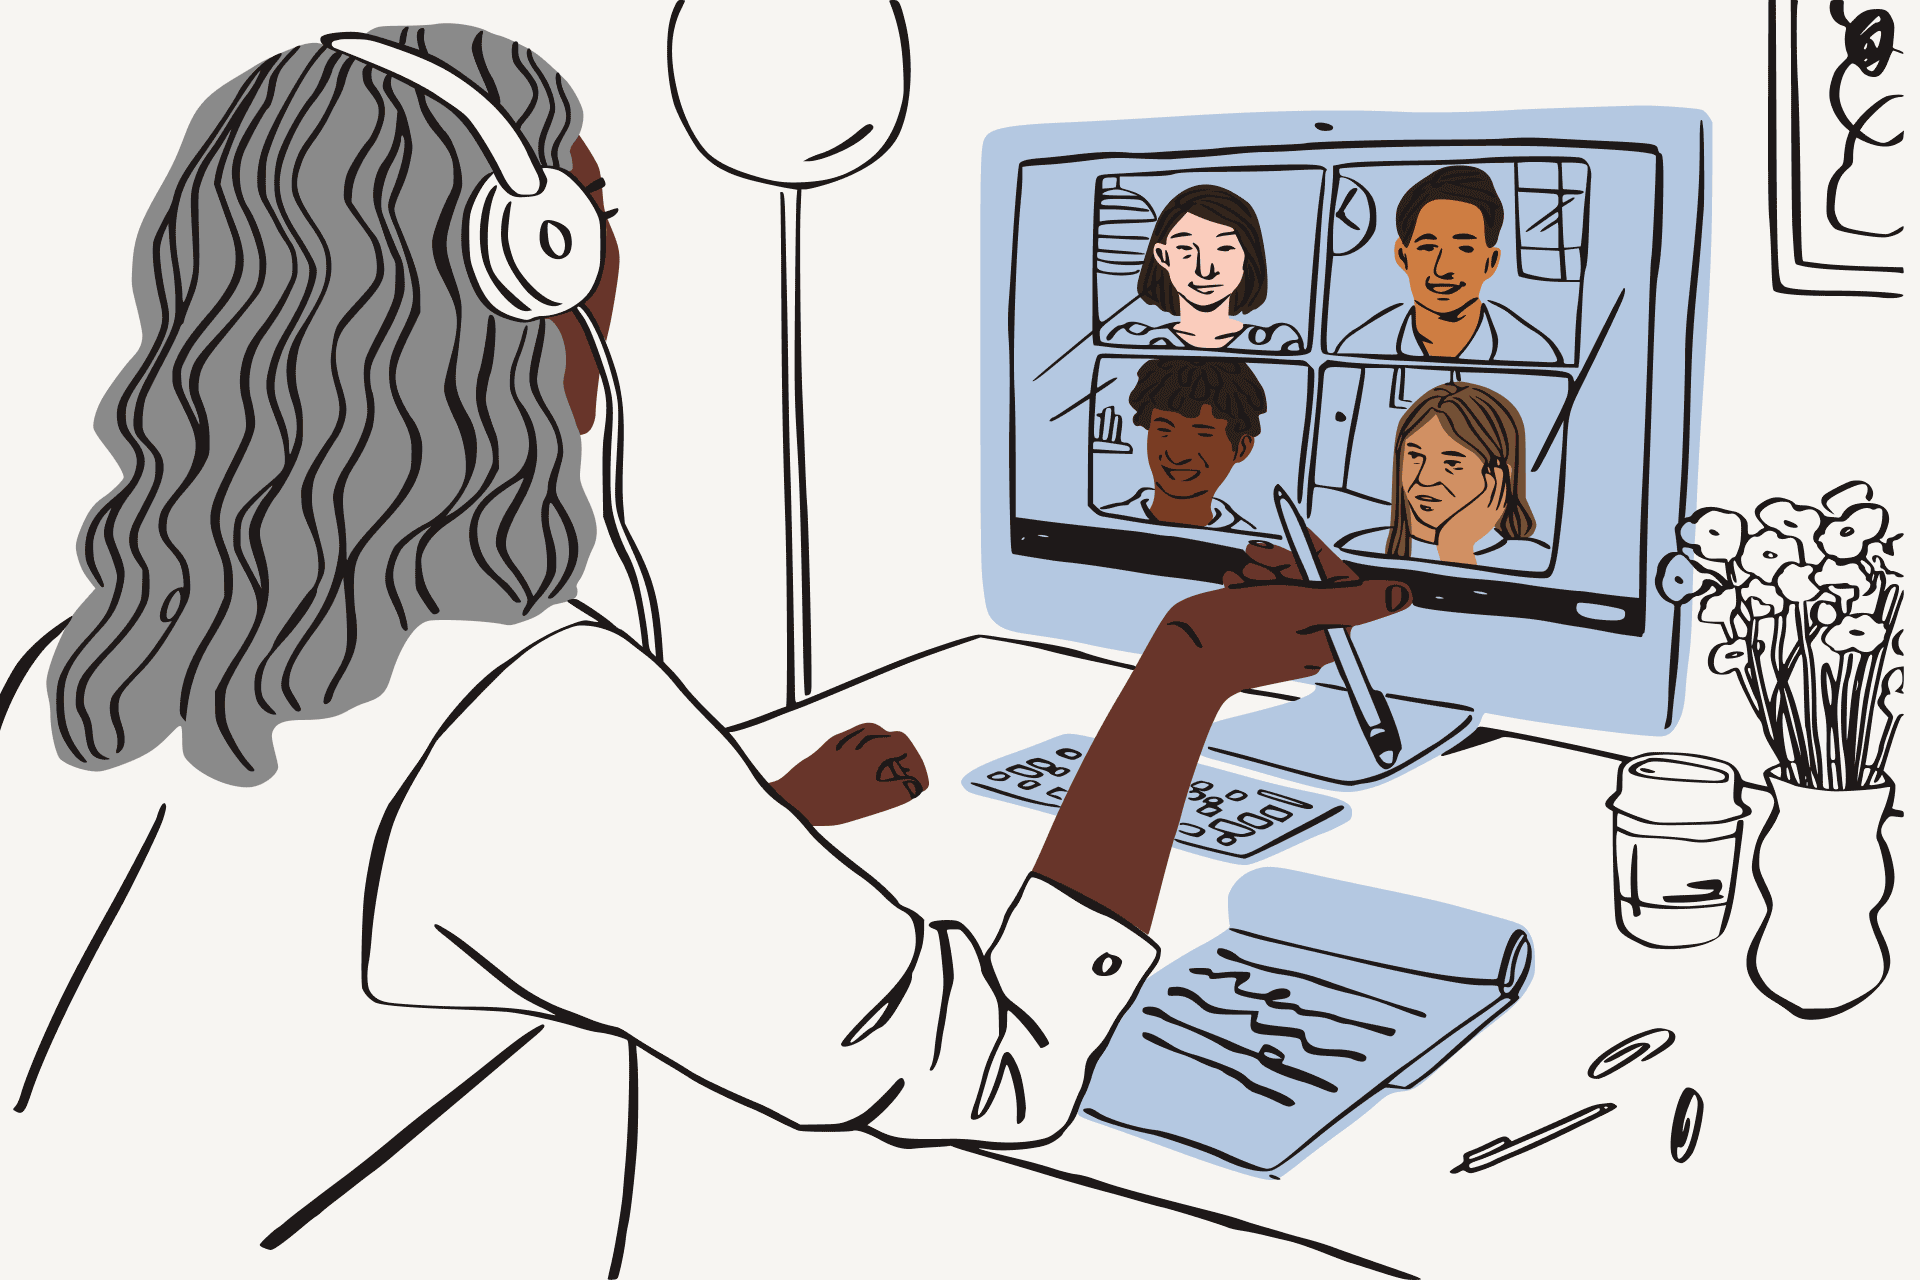 Illustration of person in Zoom meeting with 4 others